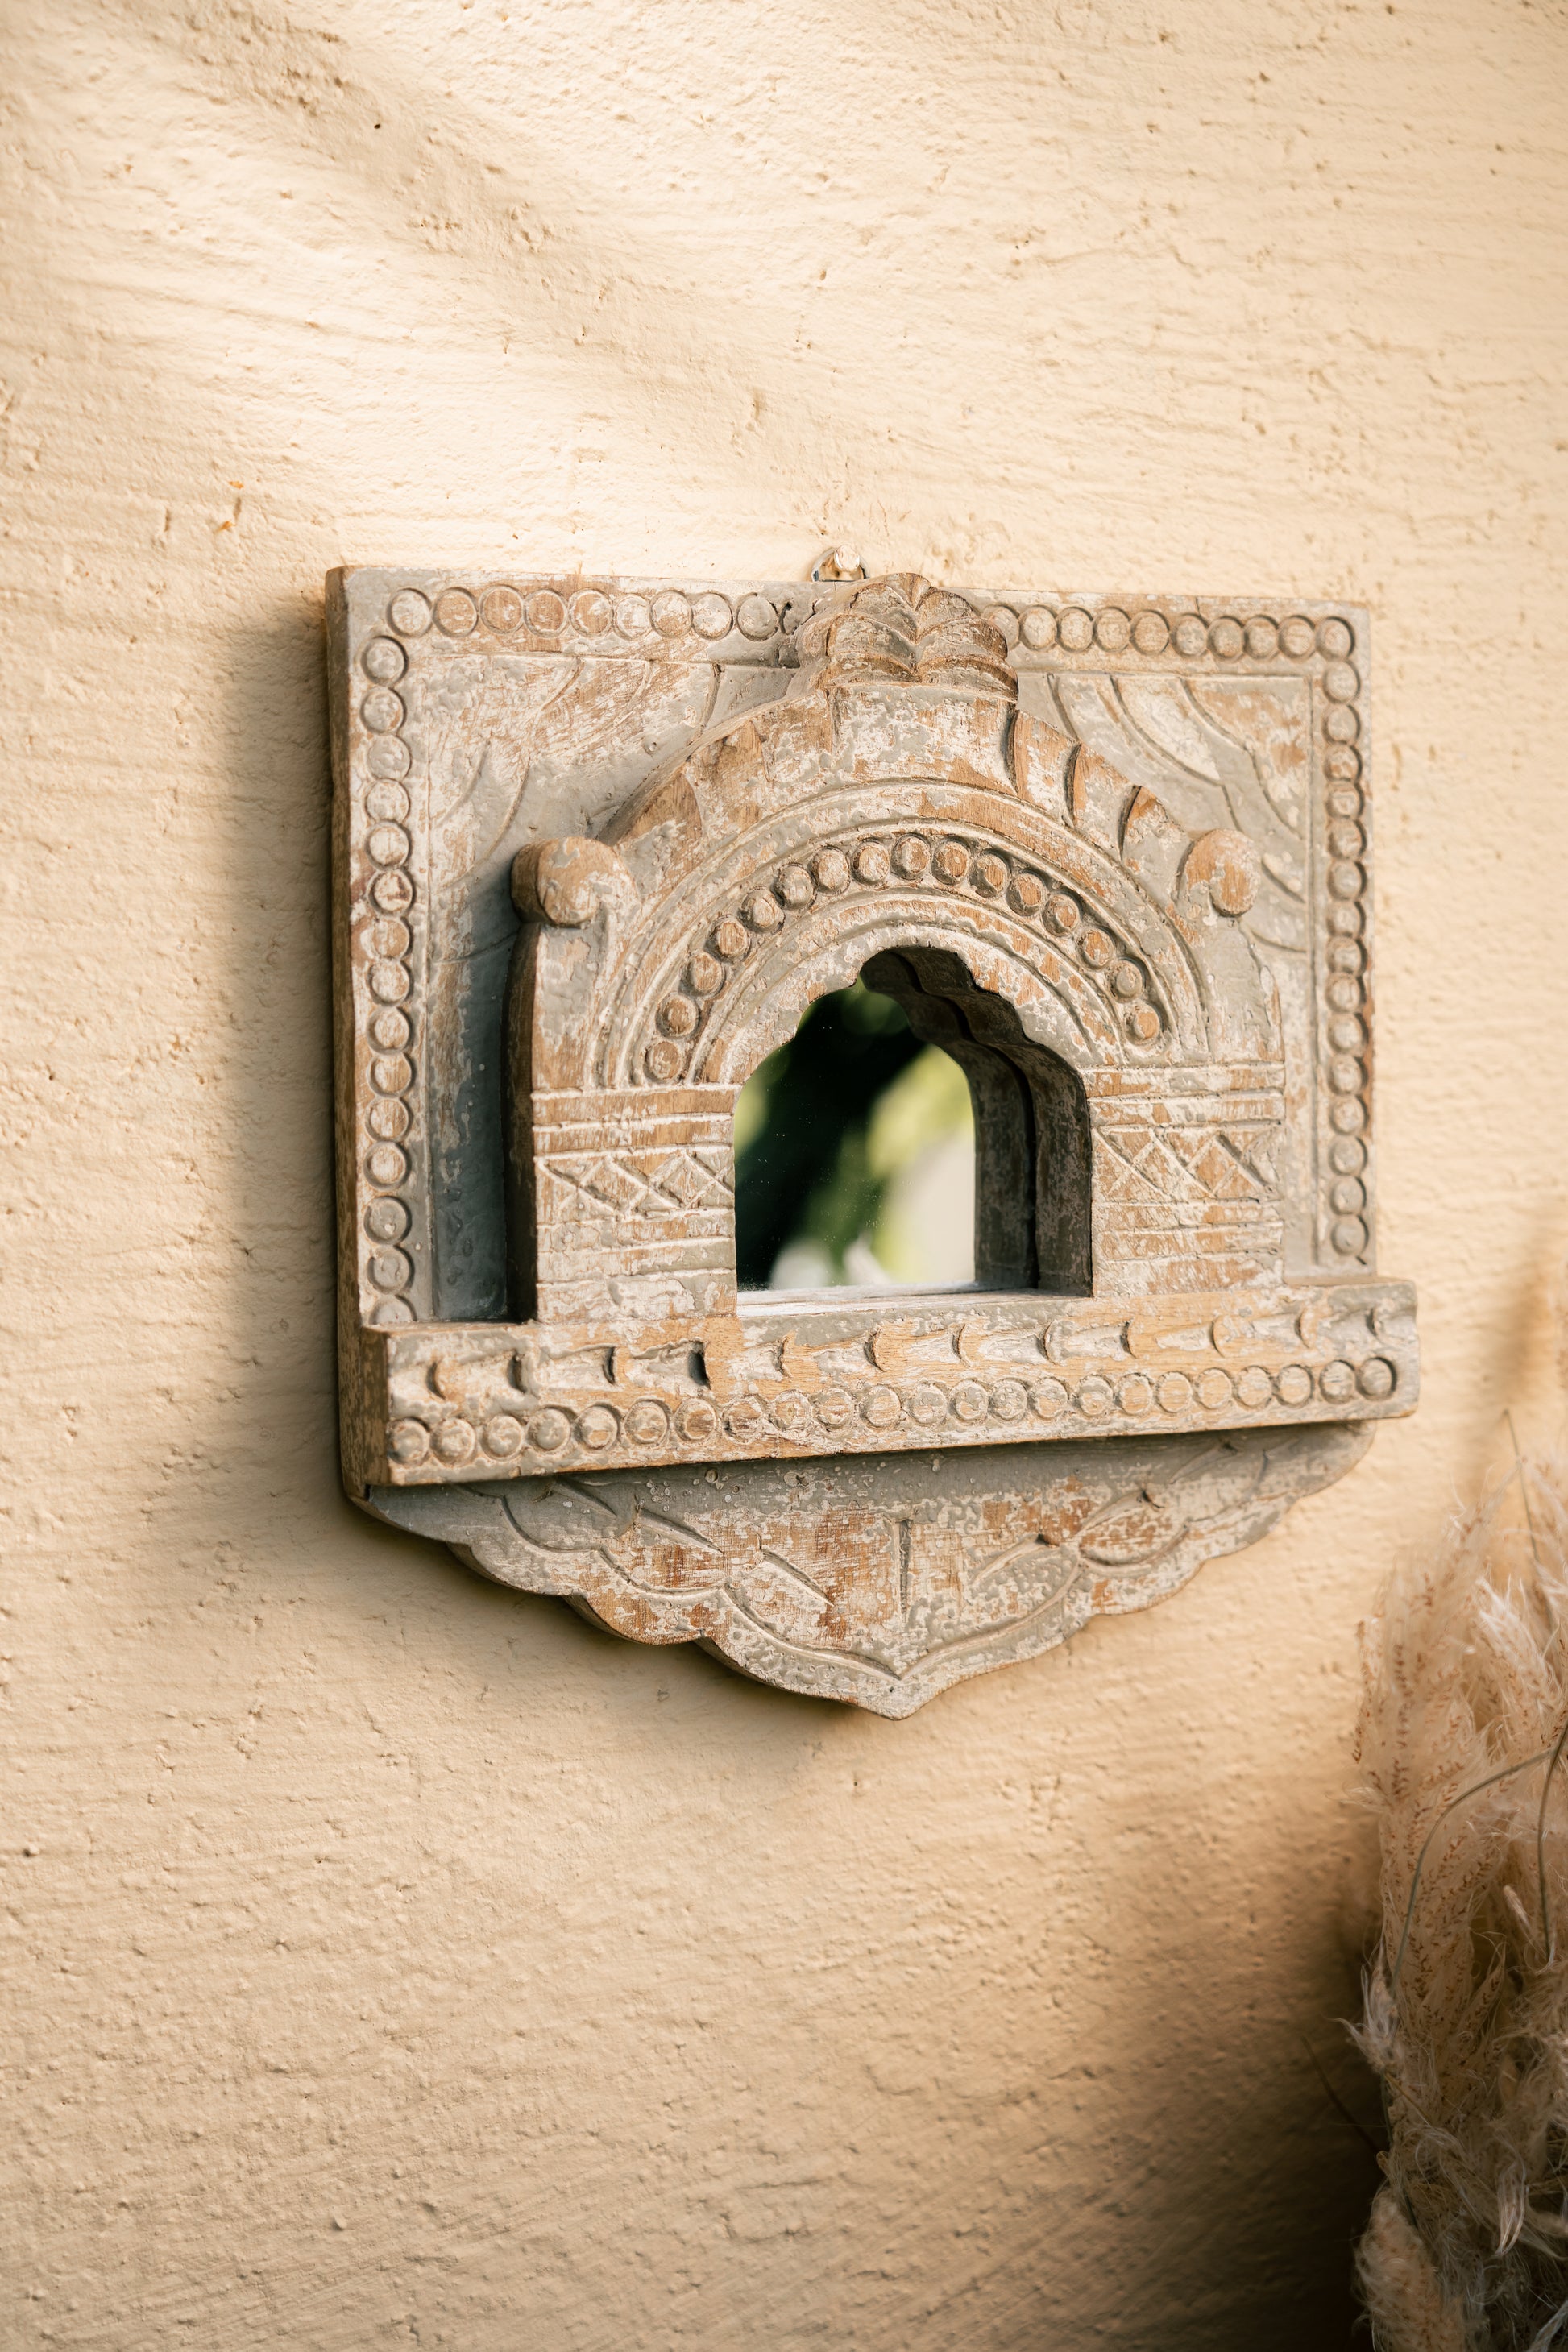  Antique Style Wall Mirror, Detailed Carved Mirror Frame, Handcrafted Wooden Wall Mirror, Preserved Wooden Mirror Frame, Rustic Charm Wall Décor, Rustic Wood Finish Mirror, Rustic Wooden Wall Mirror, Versatile Wooden Mirror Design, Vintage Carved Mirror Panel, Vintage Wooden Carved Wall Mirror, tesu